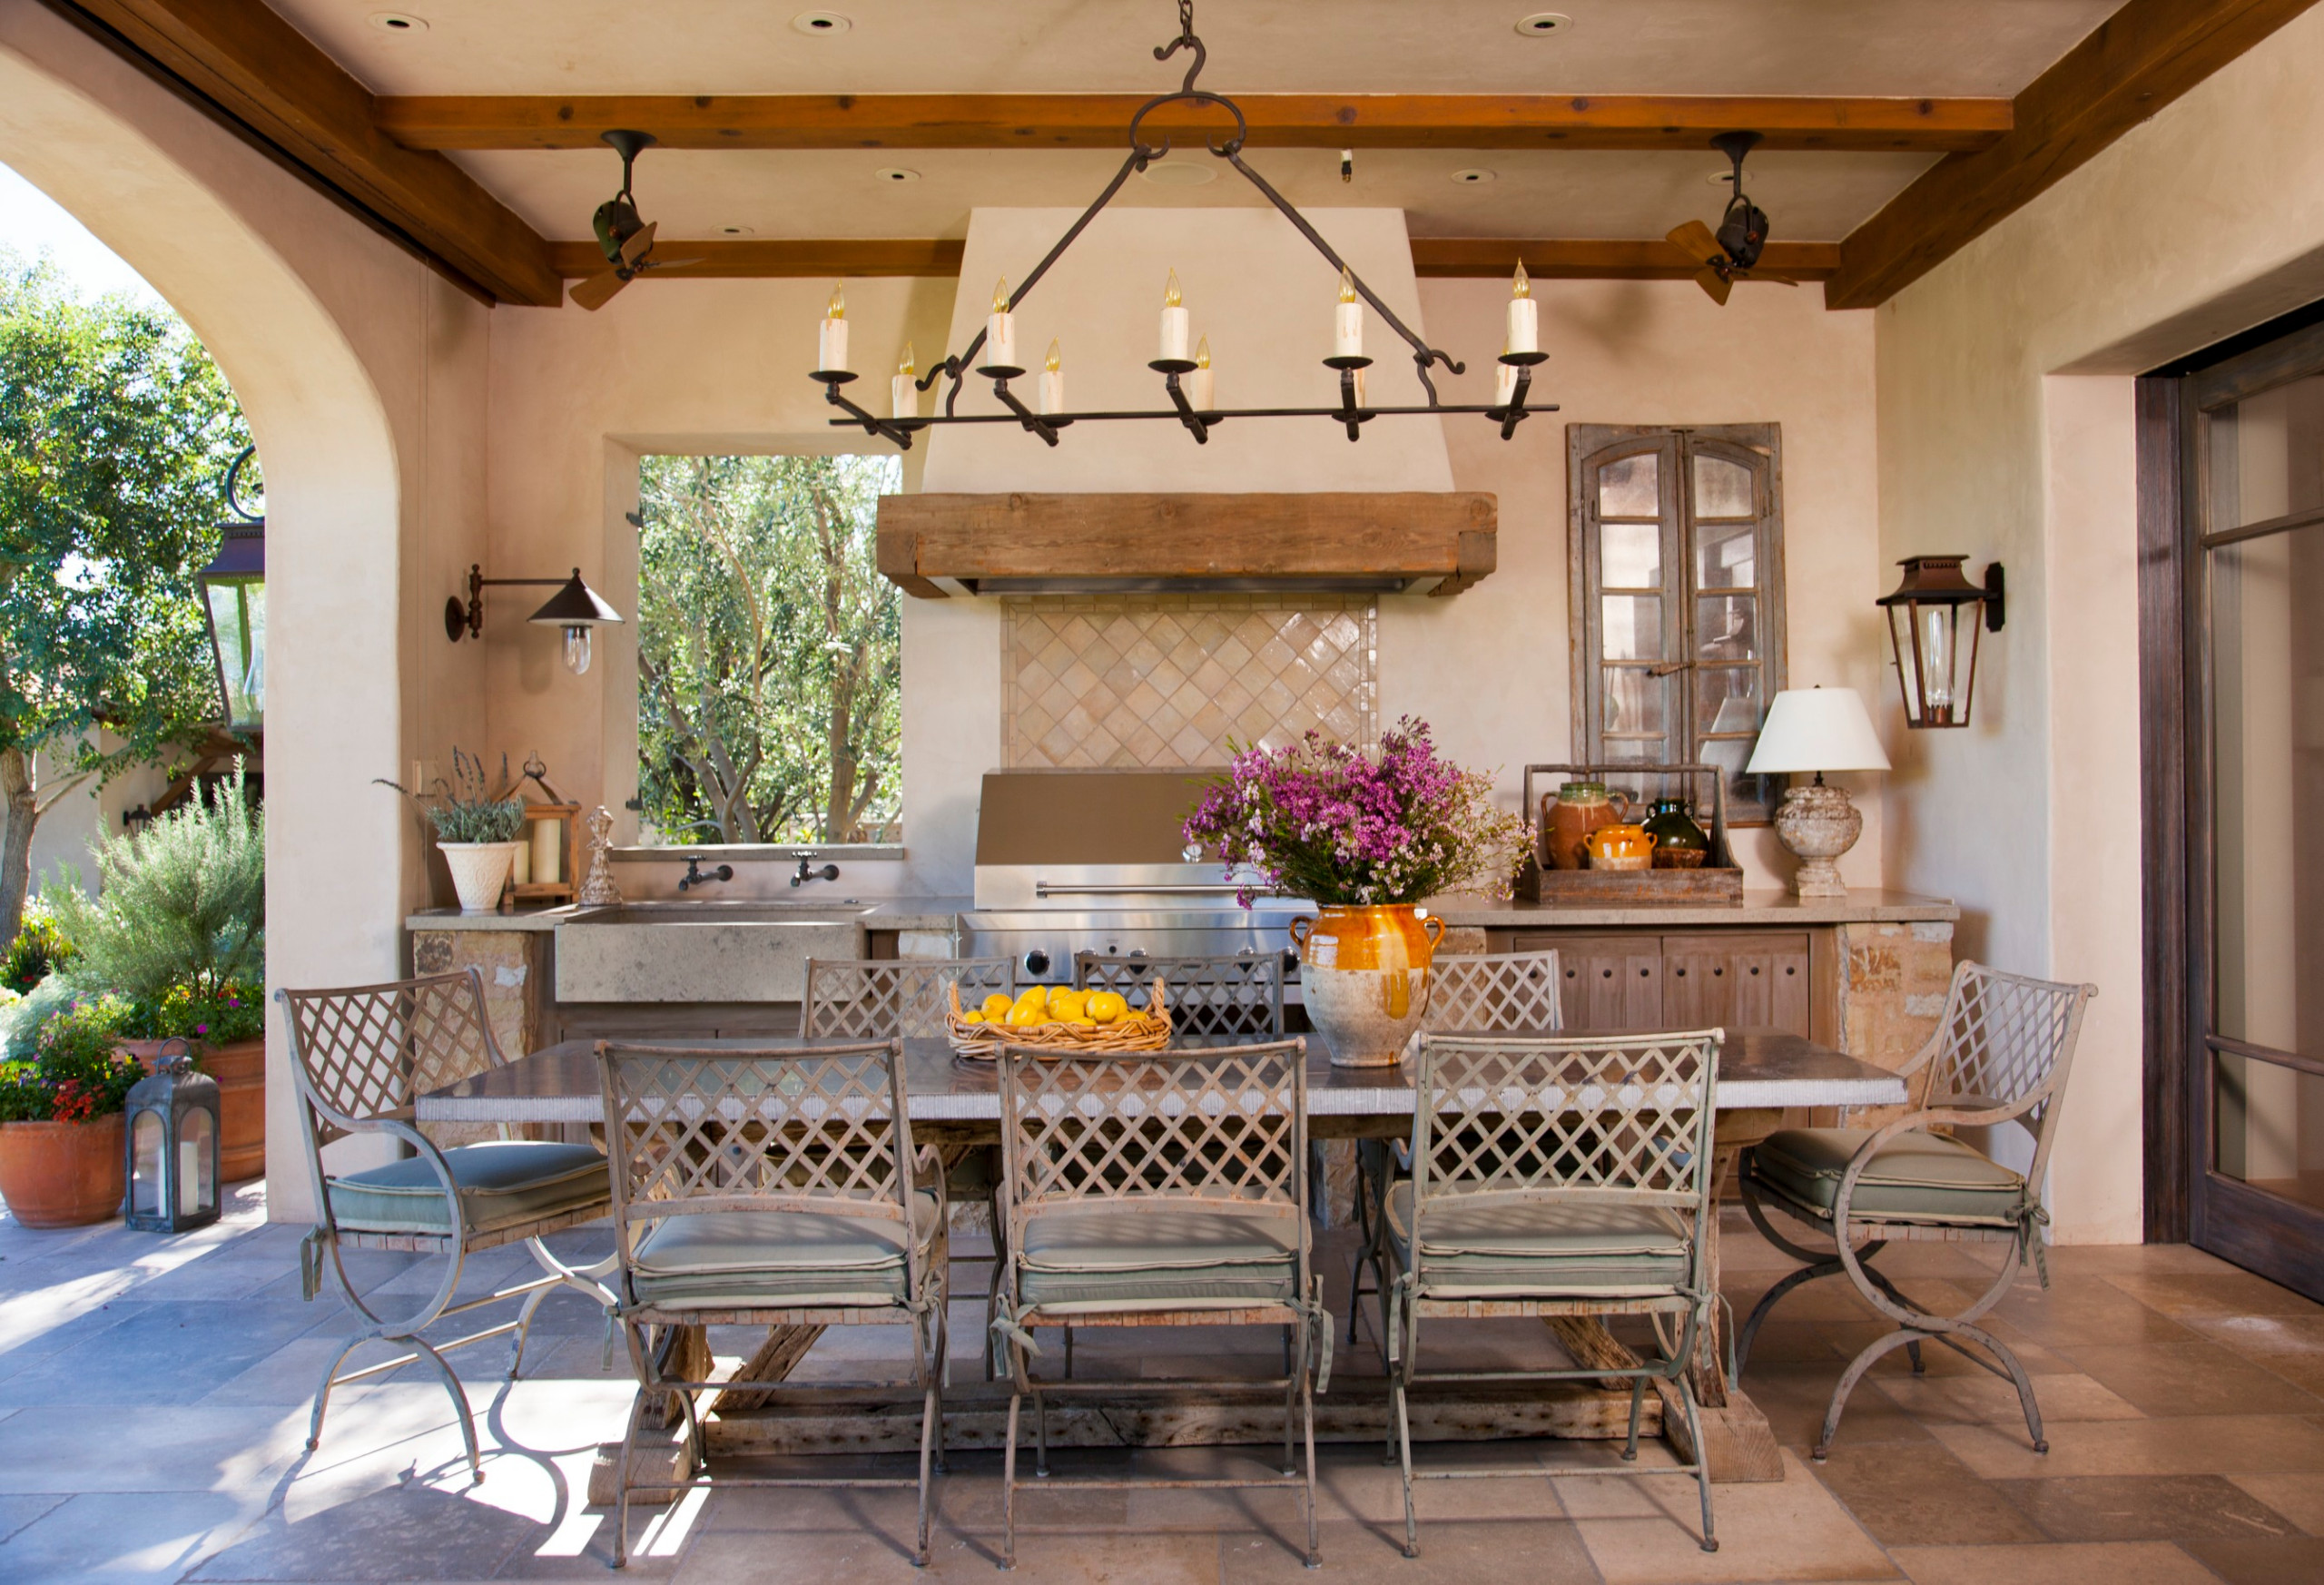 75 Beautiful Shabby Chic Style Outdoor Kitchen Design Pictures Ideas January 21 Houzz